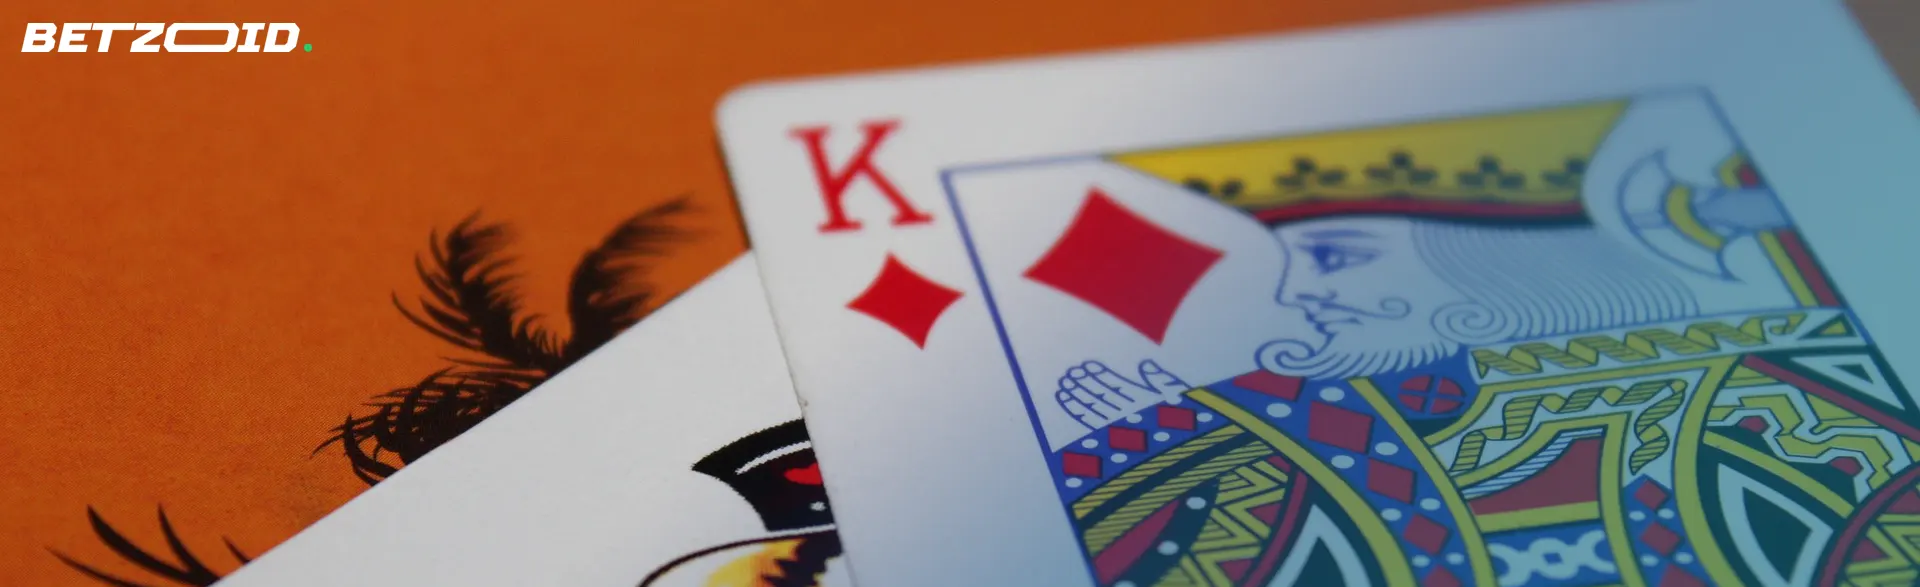 Playing cards on table of download online casinos.